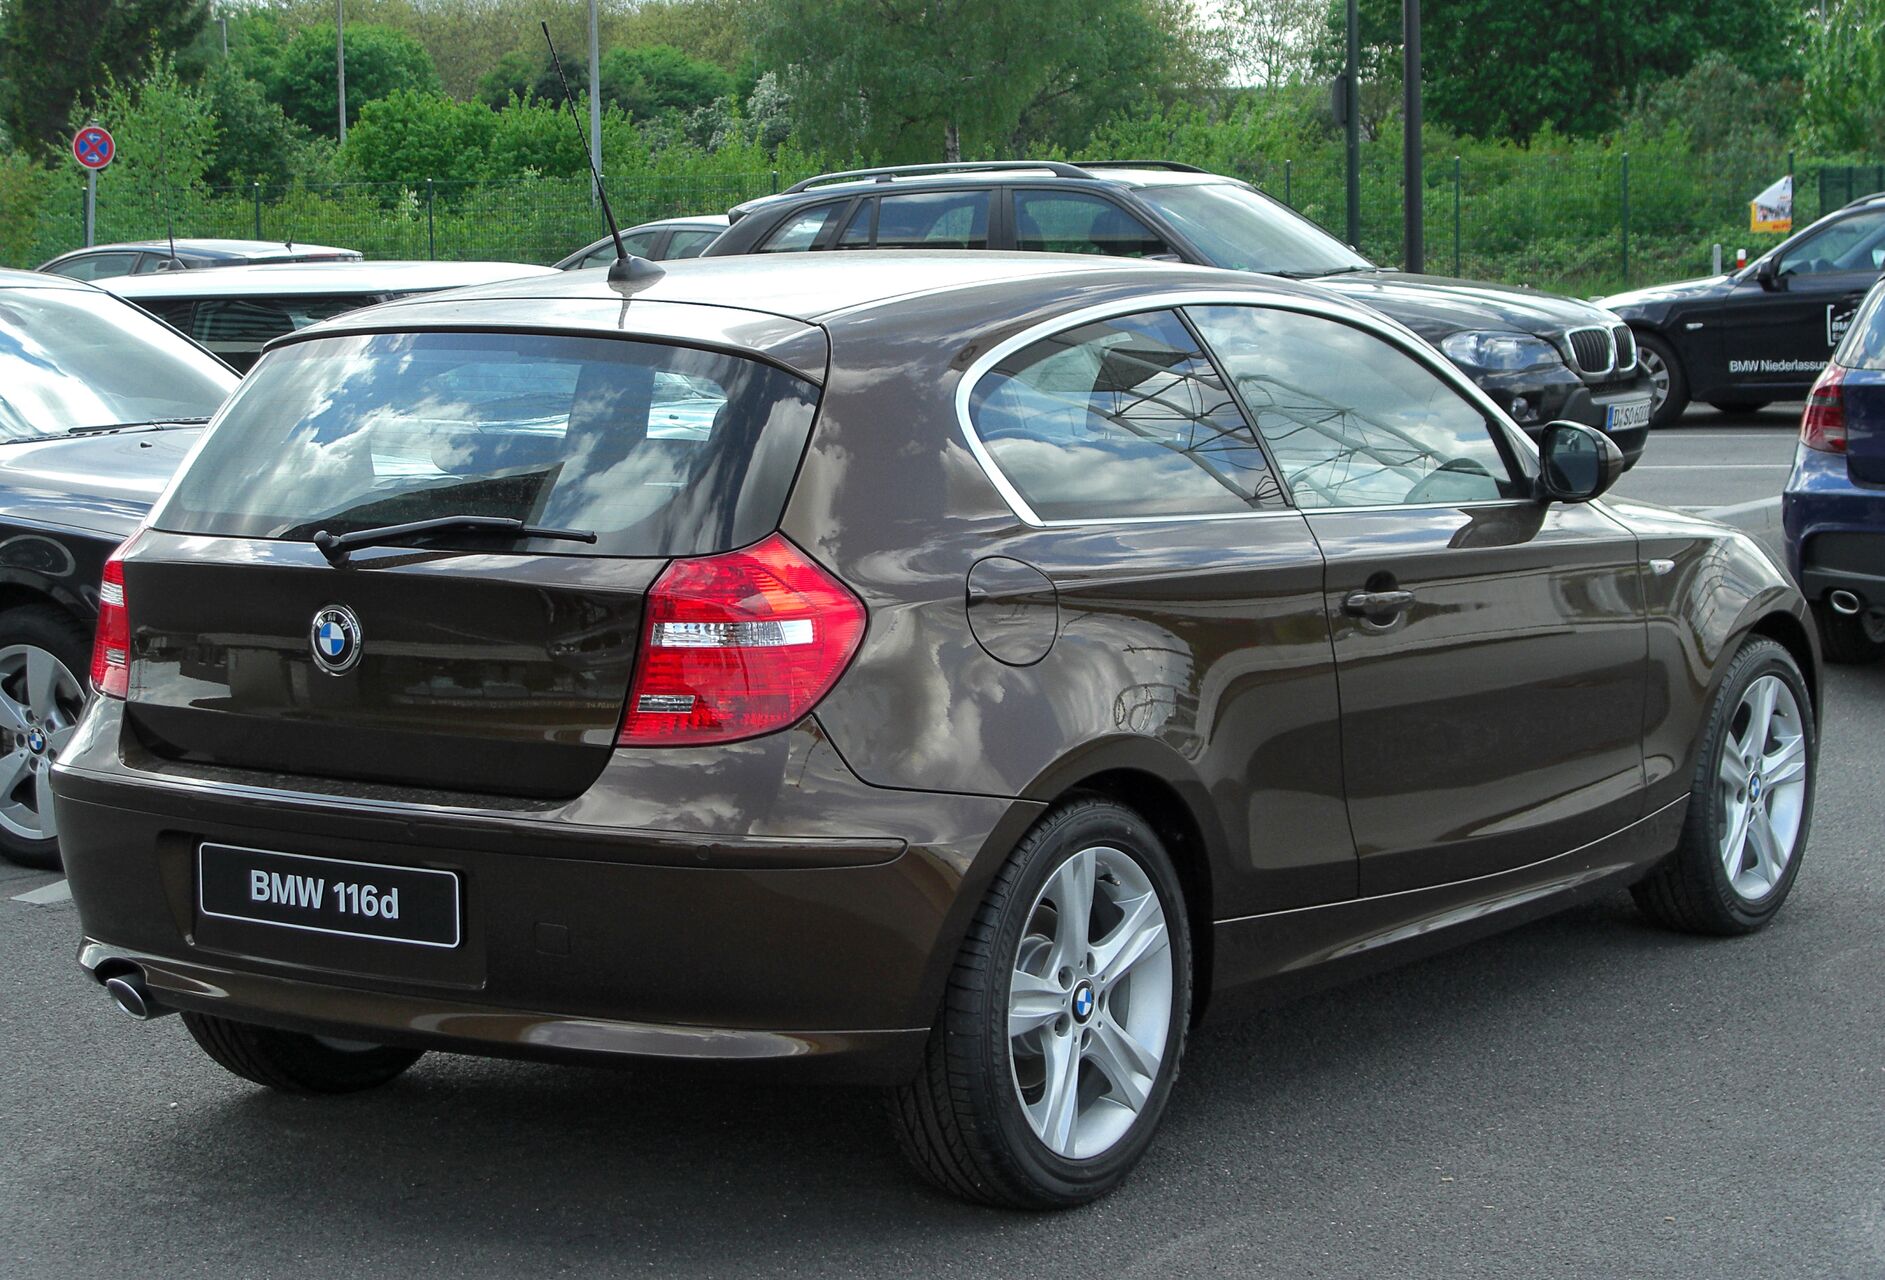 BMW 1 Series Hatchback 3dr (E81) 116i (122 Hp) 2007 - 2009 Specs and  Technical Data, Fuel Consumption, Dimensions